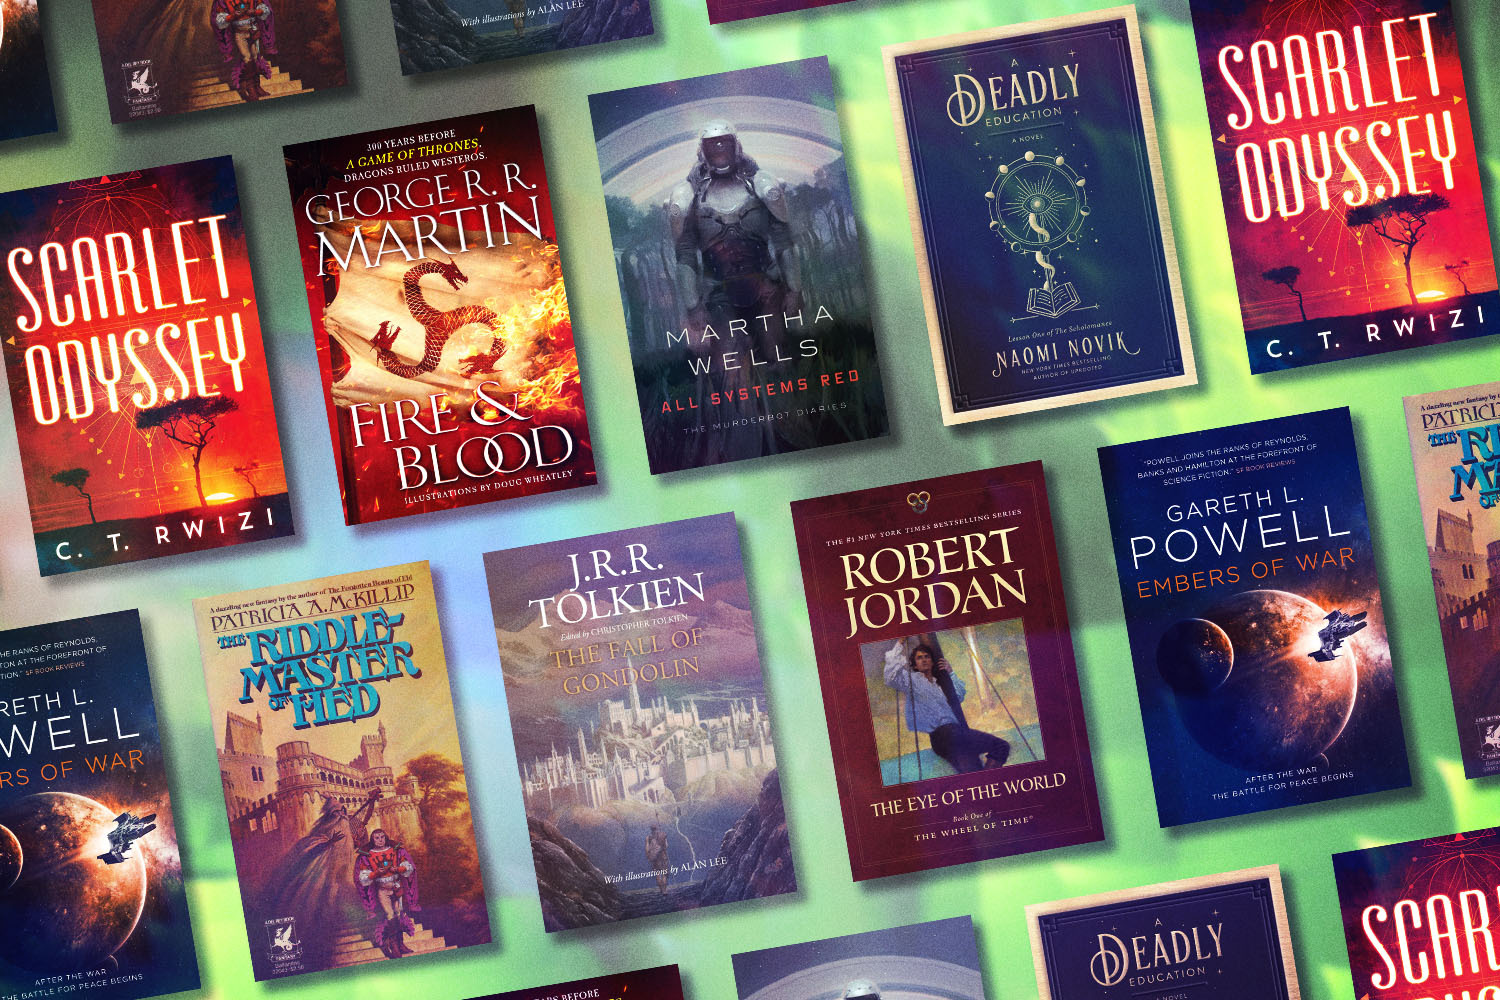 A grid of the best science-fiction and fantasy books for adults, from Robert Jordan's "The Wheel of Time" series to J.R.R. Tolkien's "The Fall of Gondolin" to Naomi Novik's "A Deadly Education," on a green background